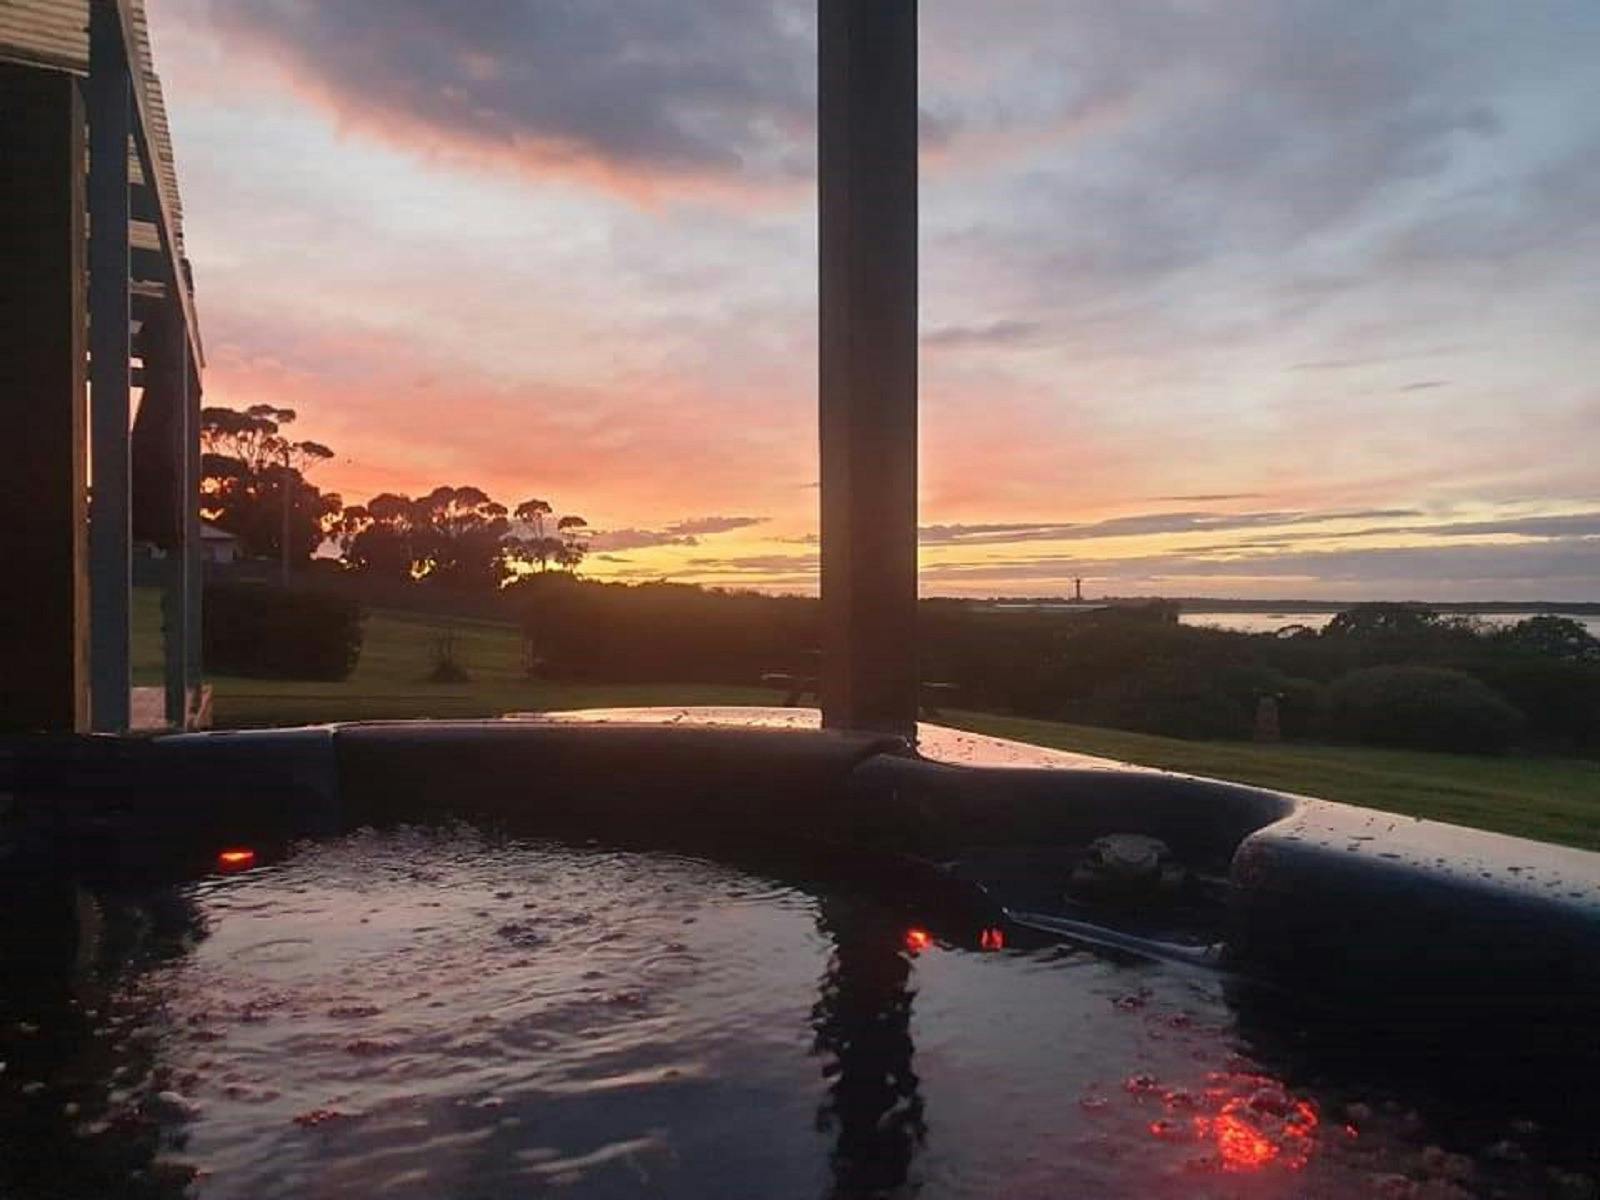 Outdoor spa looking out to sunset